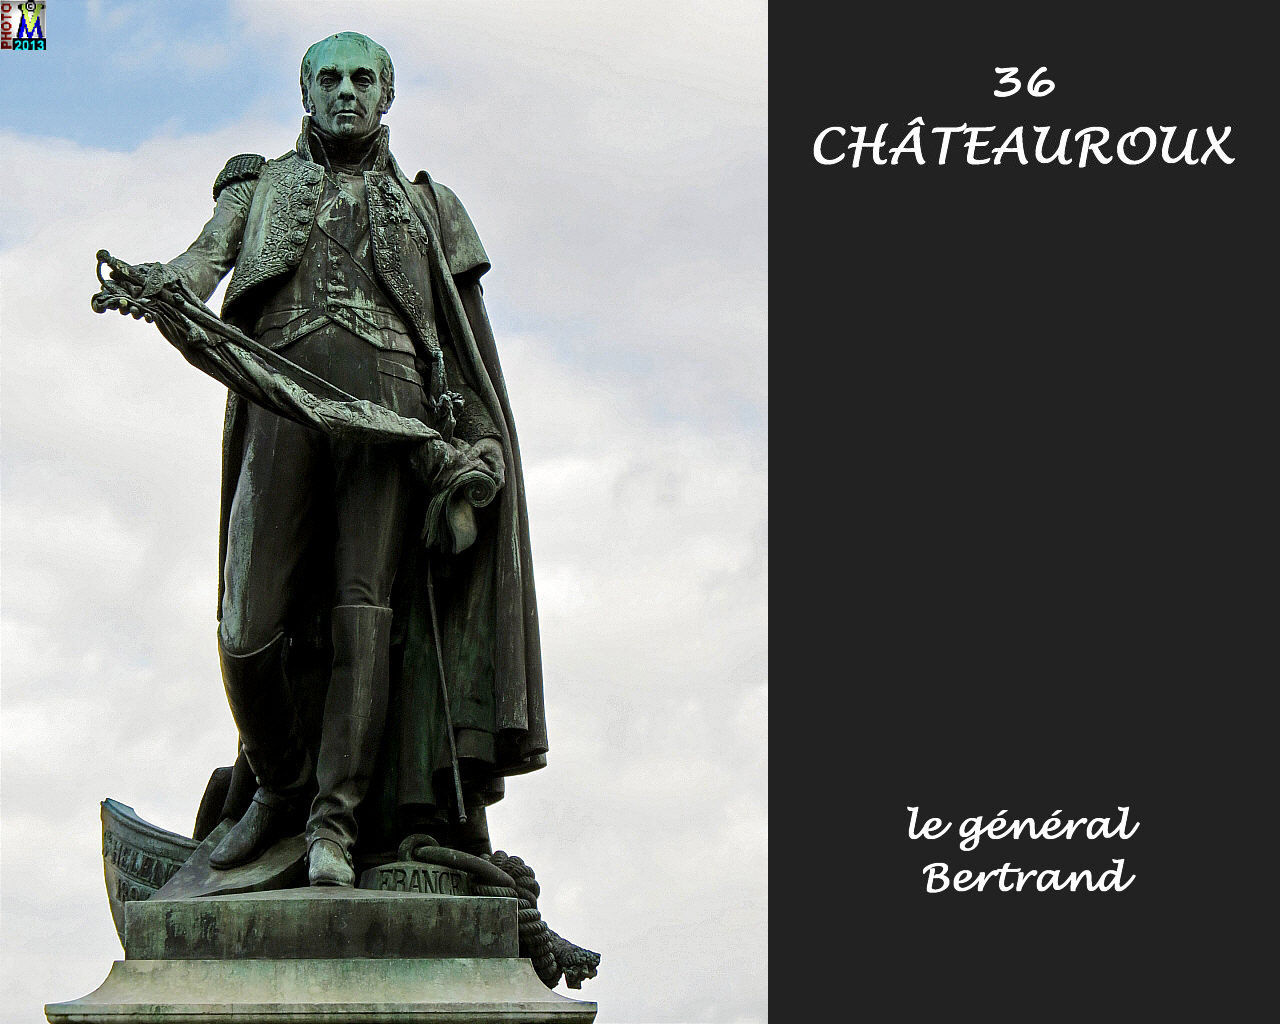 36CHATEAUROUX_statue_100.jpg